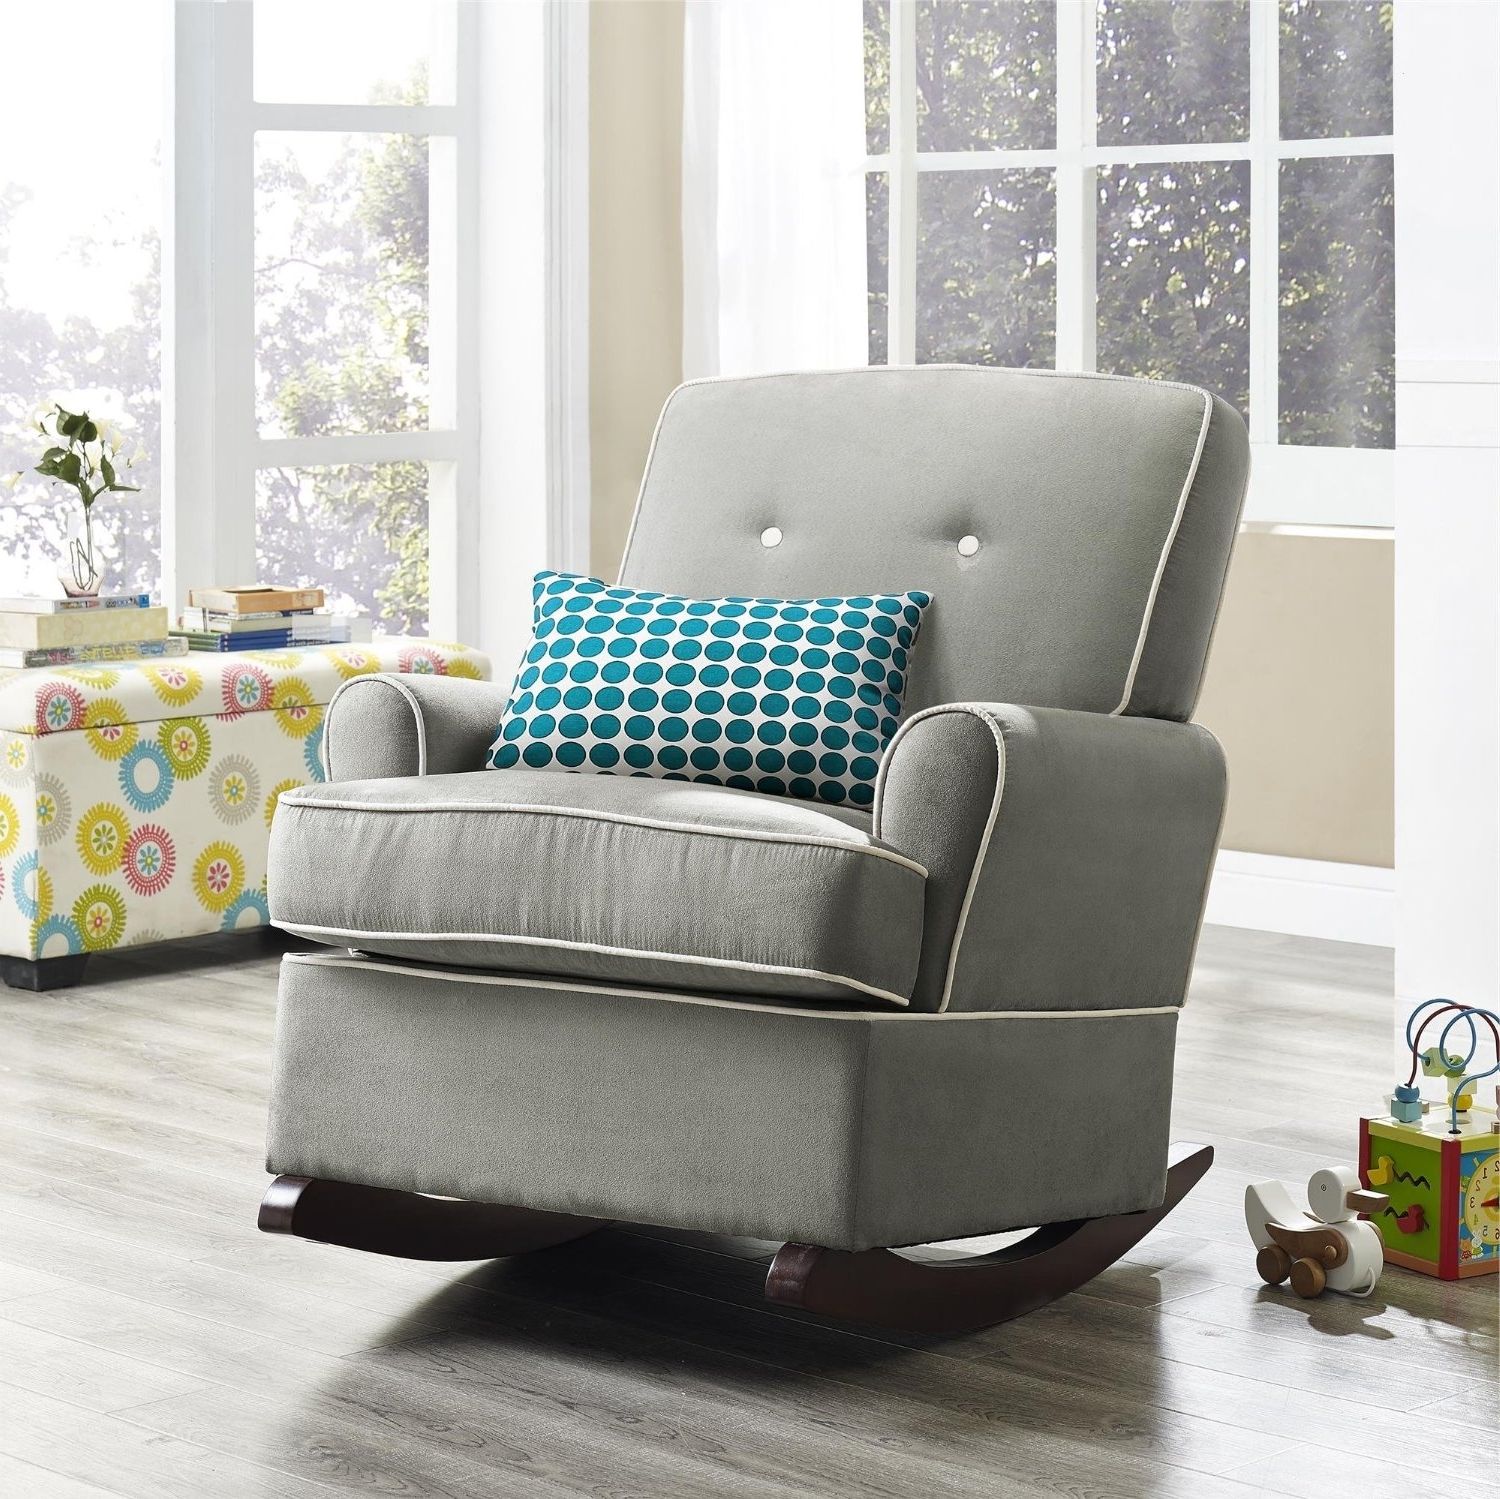 Best Rocking Chairs (View 10 of 15)